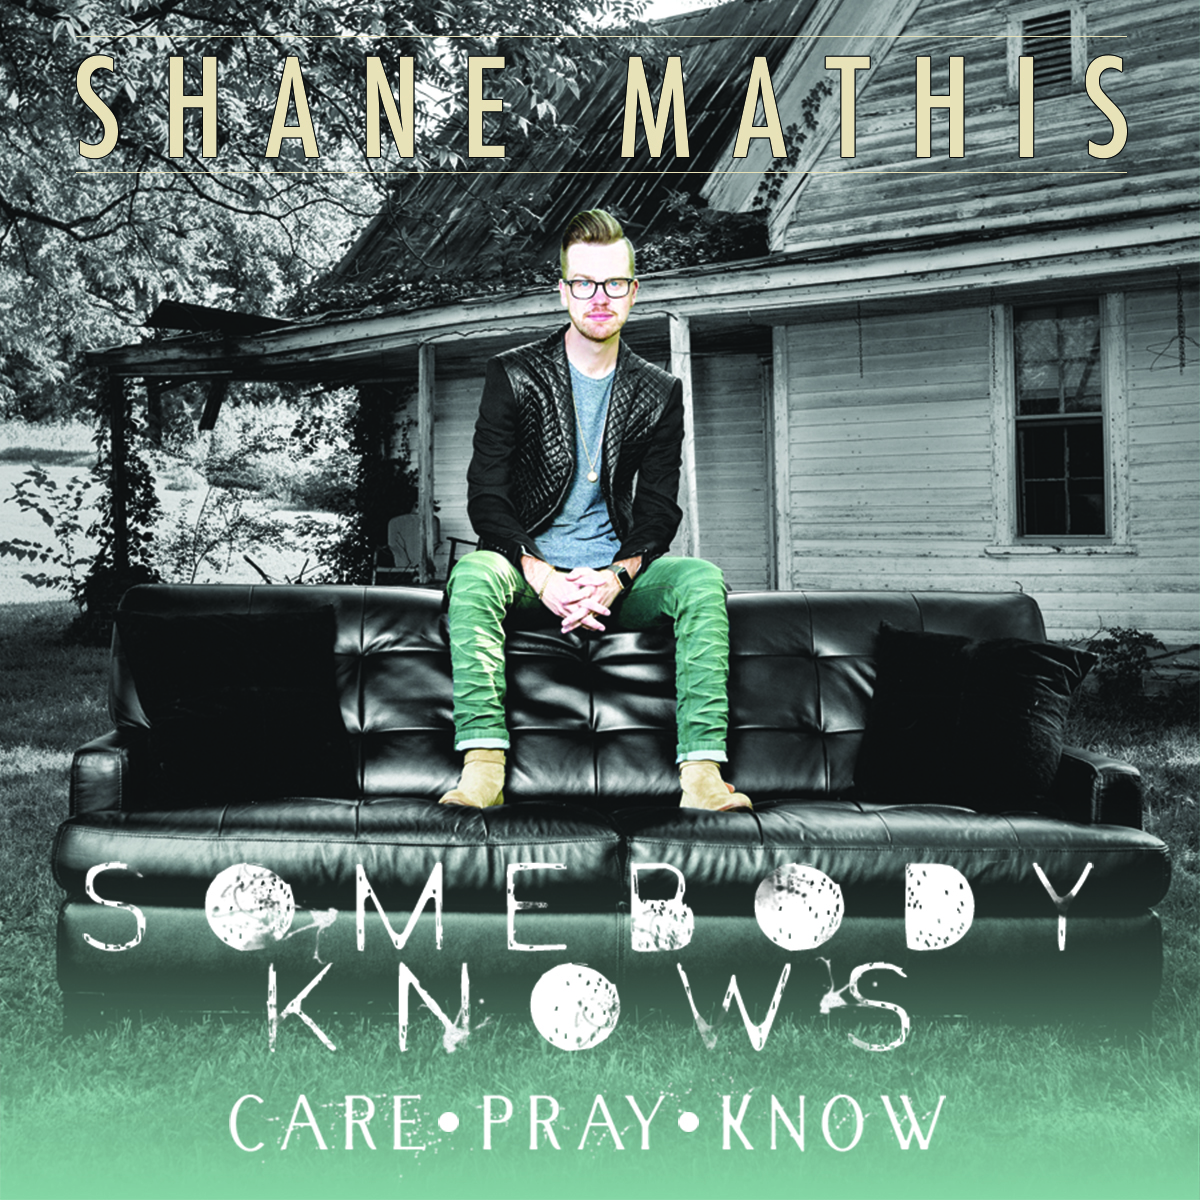 SHANE MATHIS ANNOUNCES HIS MUCH-ANTICIPATED RELEASE ON CHAPEL VALLEY RECORDâ€™S SANCTUARY LABEL â€œSOMEBODY KNOWSâ€